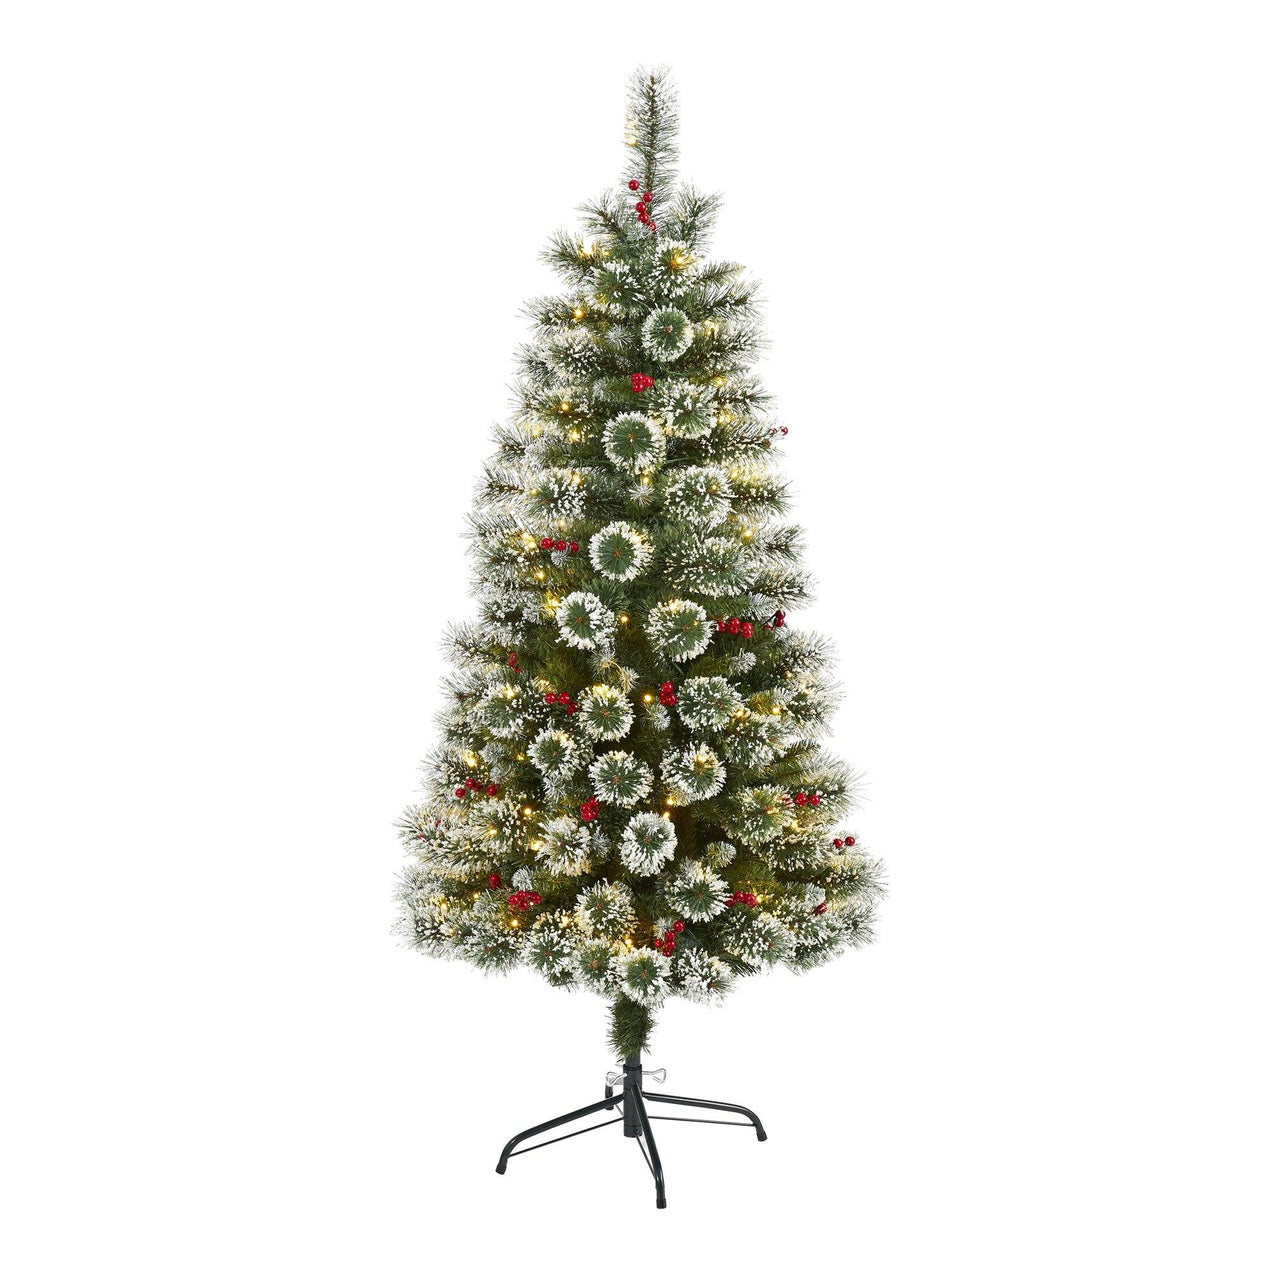 5’ Frosted Swiss Pine Artificial Christmas Tree with 200 Clear LED Lights and Berries